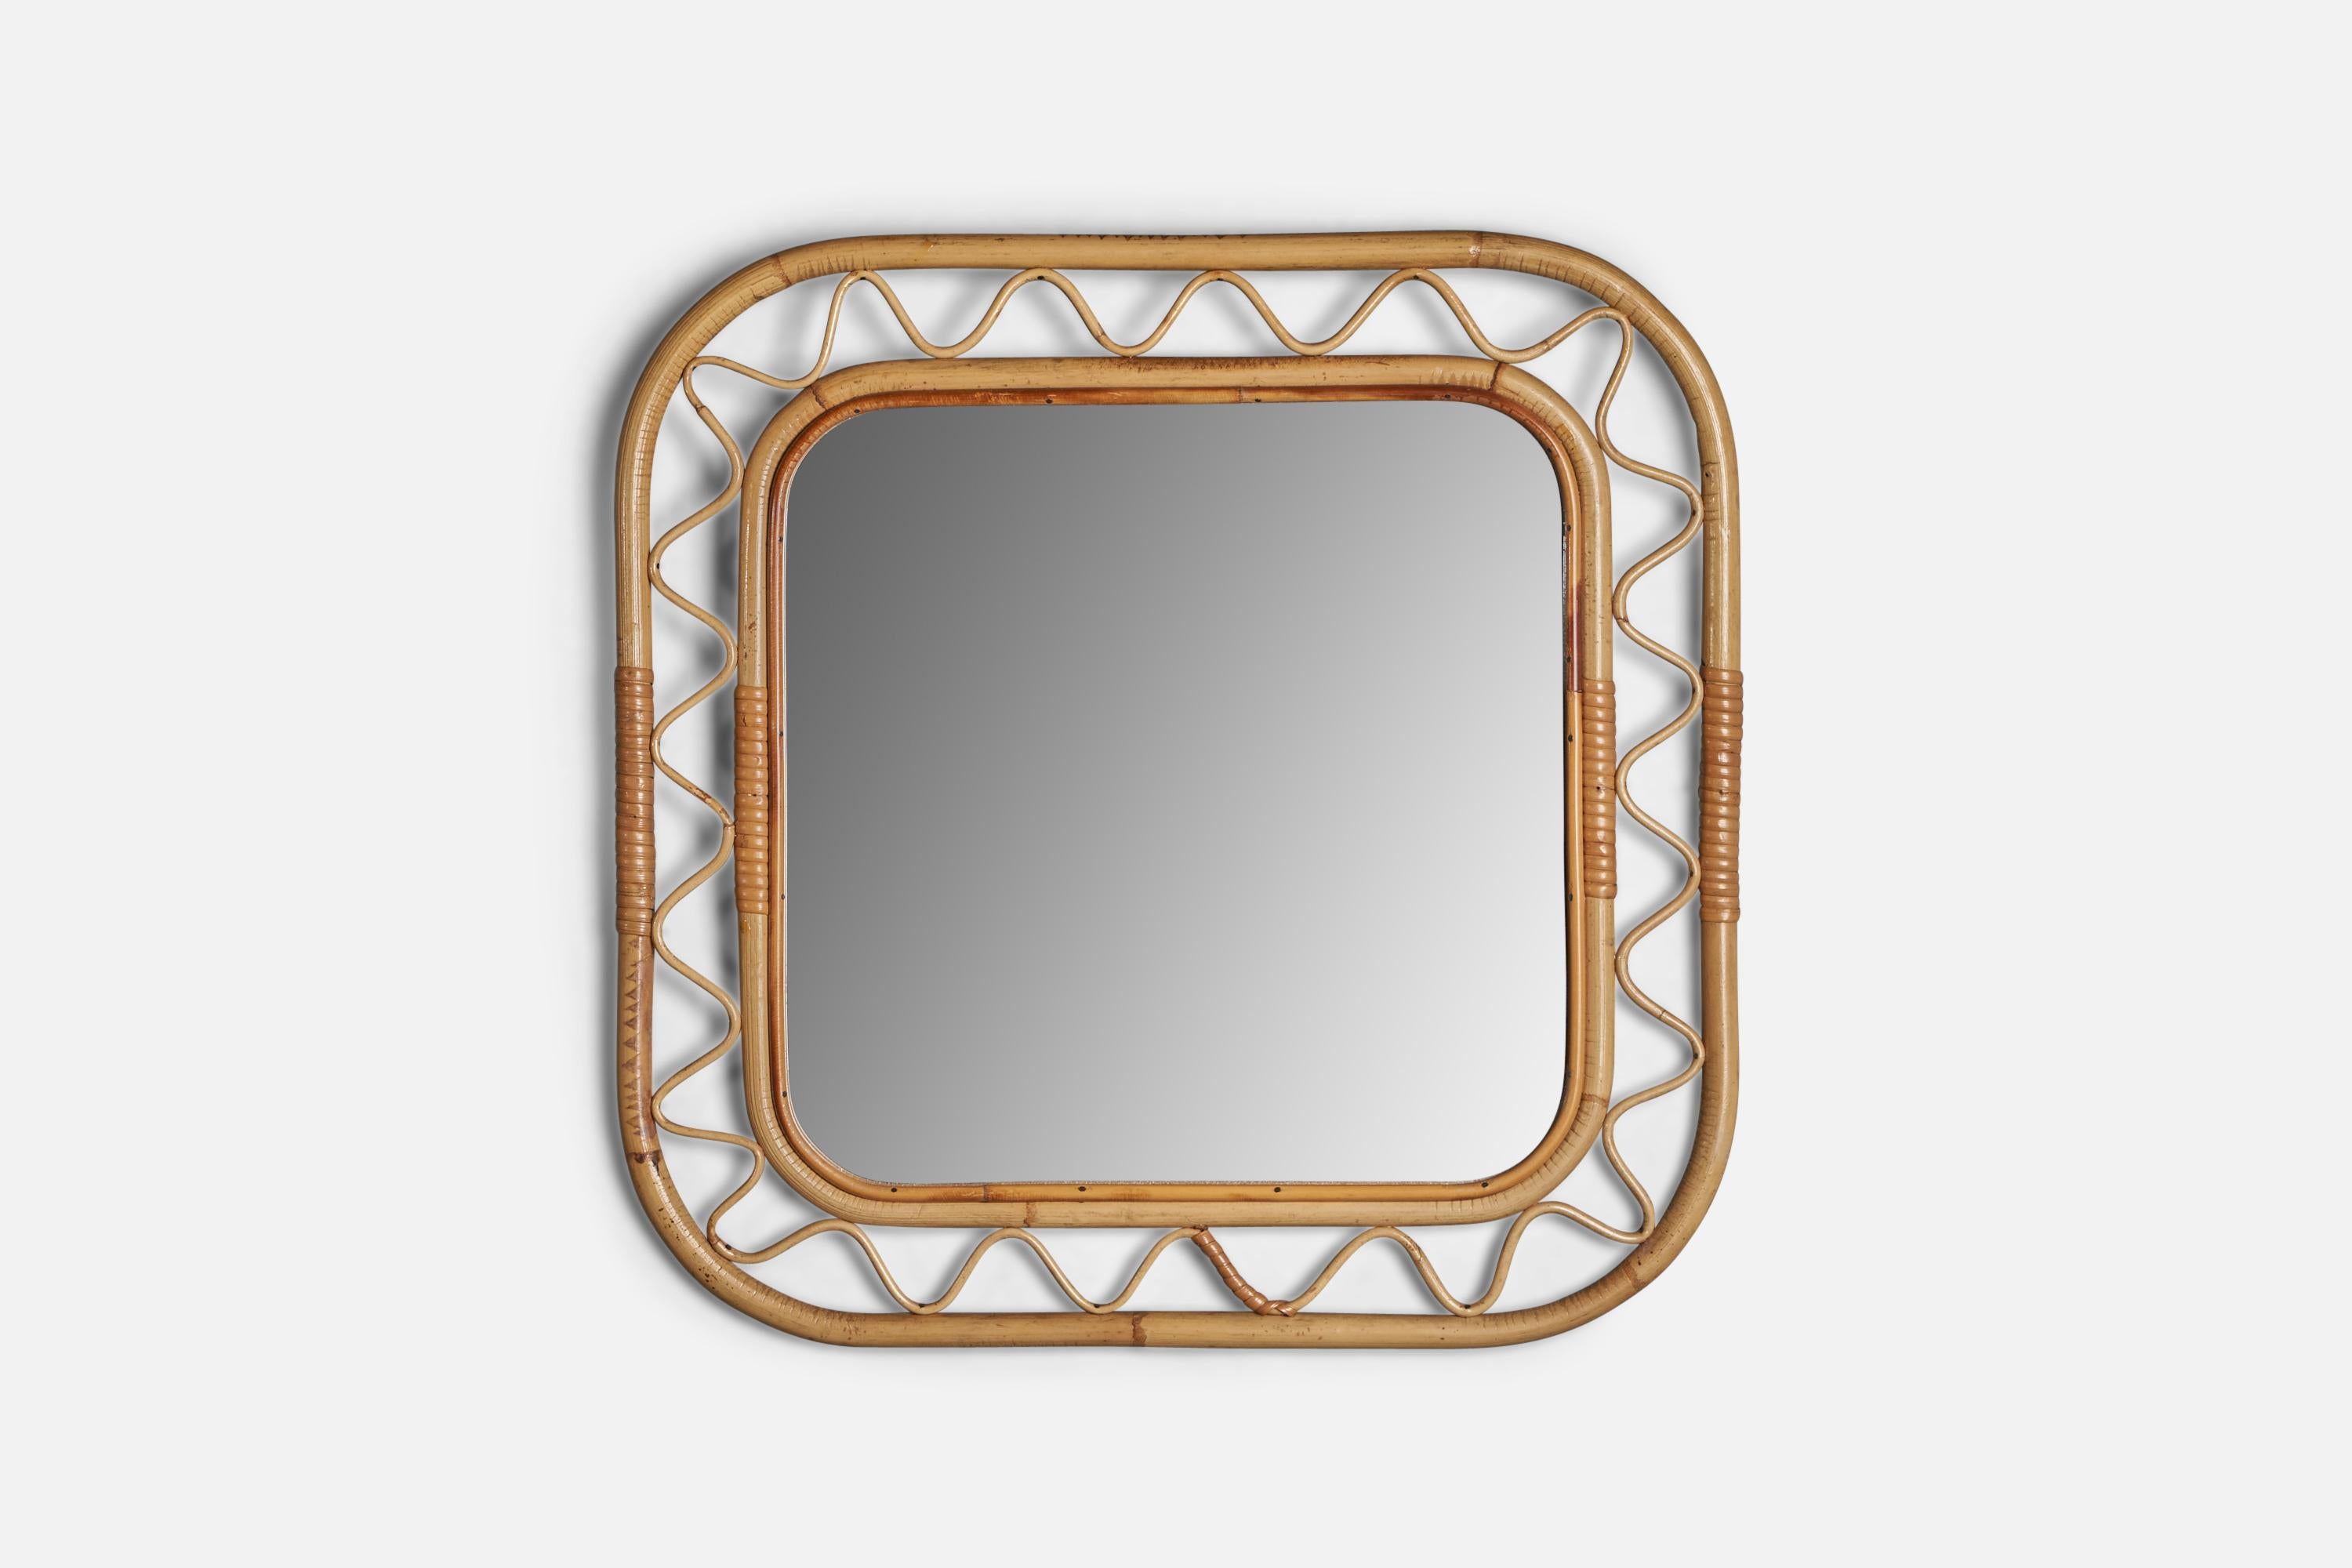 A bamboo and rattan wall mirror, designed and produced in Italy, 1950s.